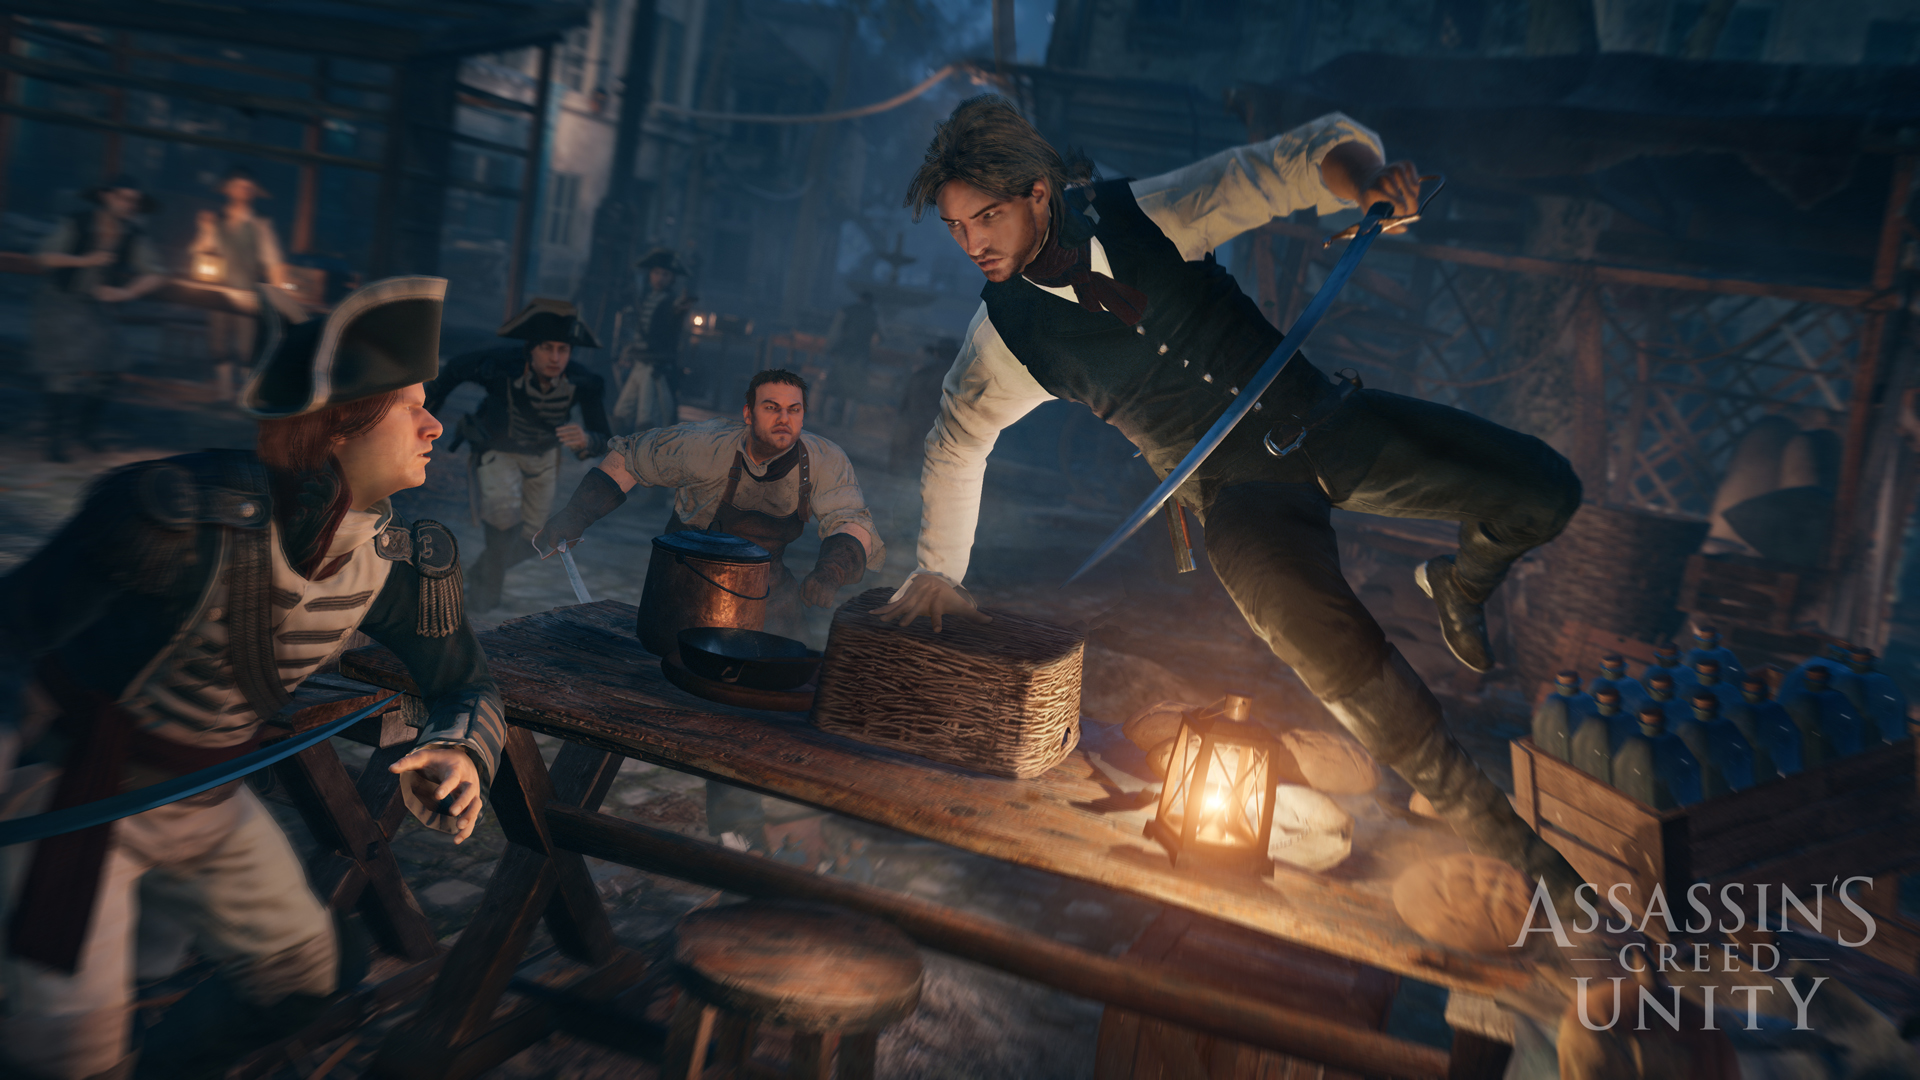 Assassin's Creed Unity Gallery #5